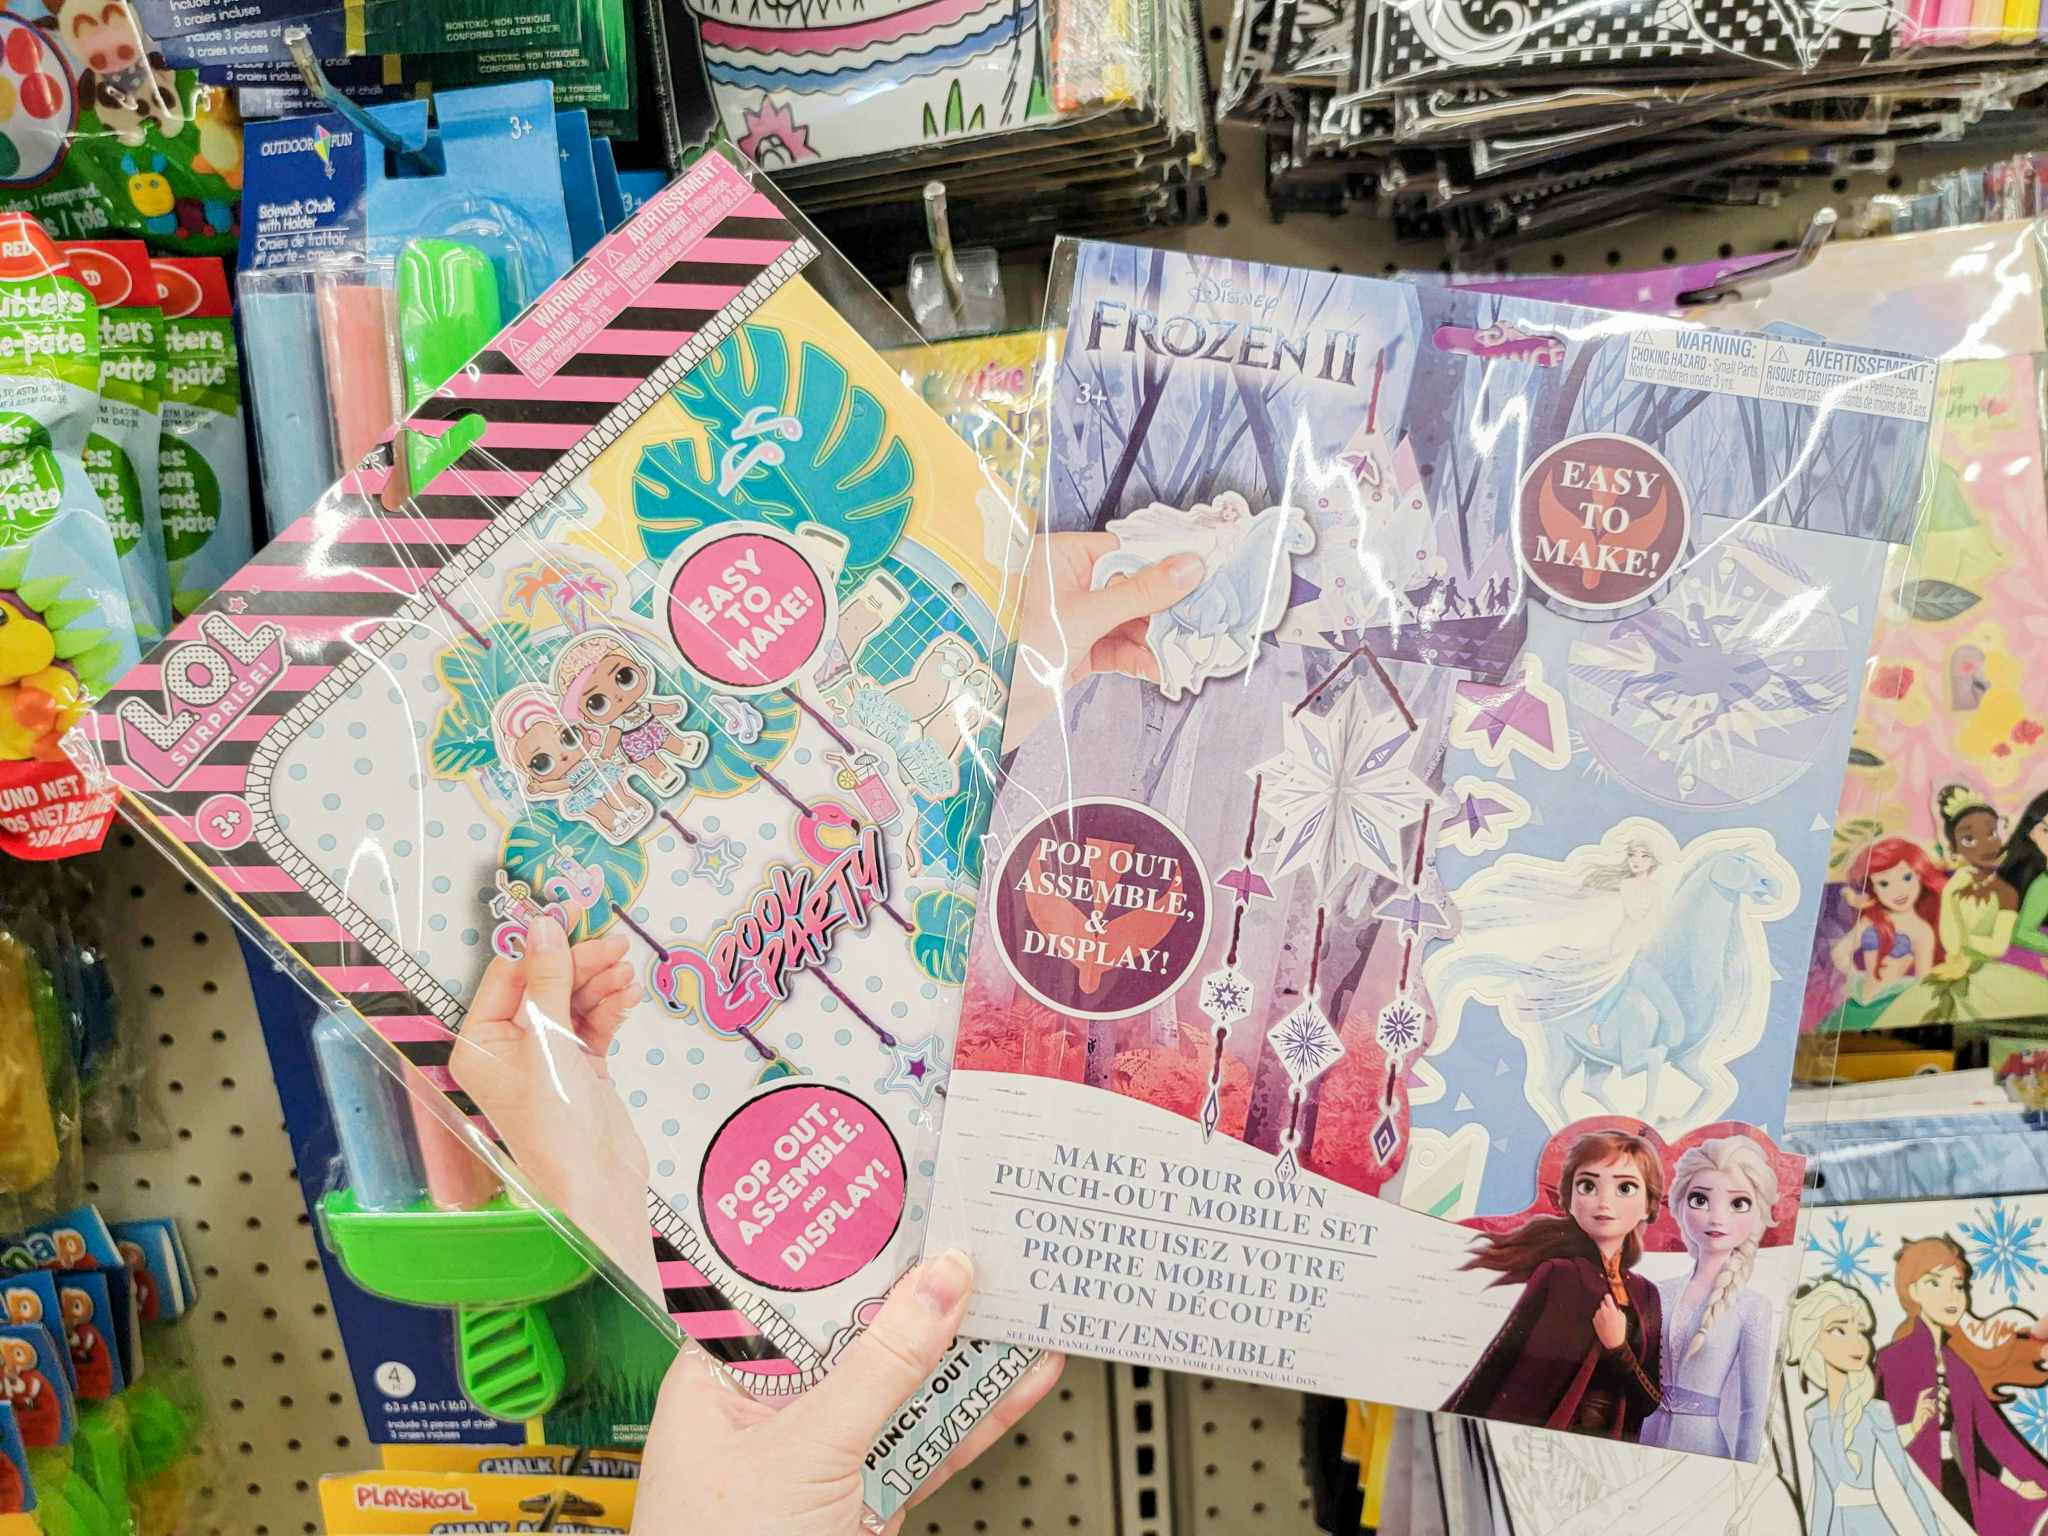 hand holding 2 make your own mobile craft kits, lol surprise and disney frozen